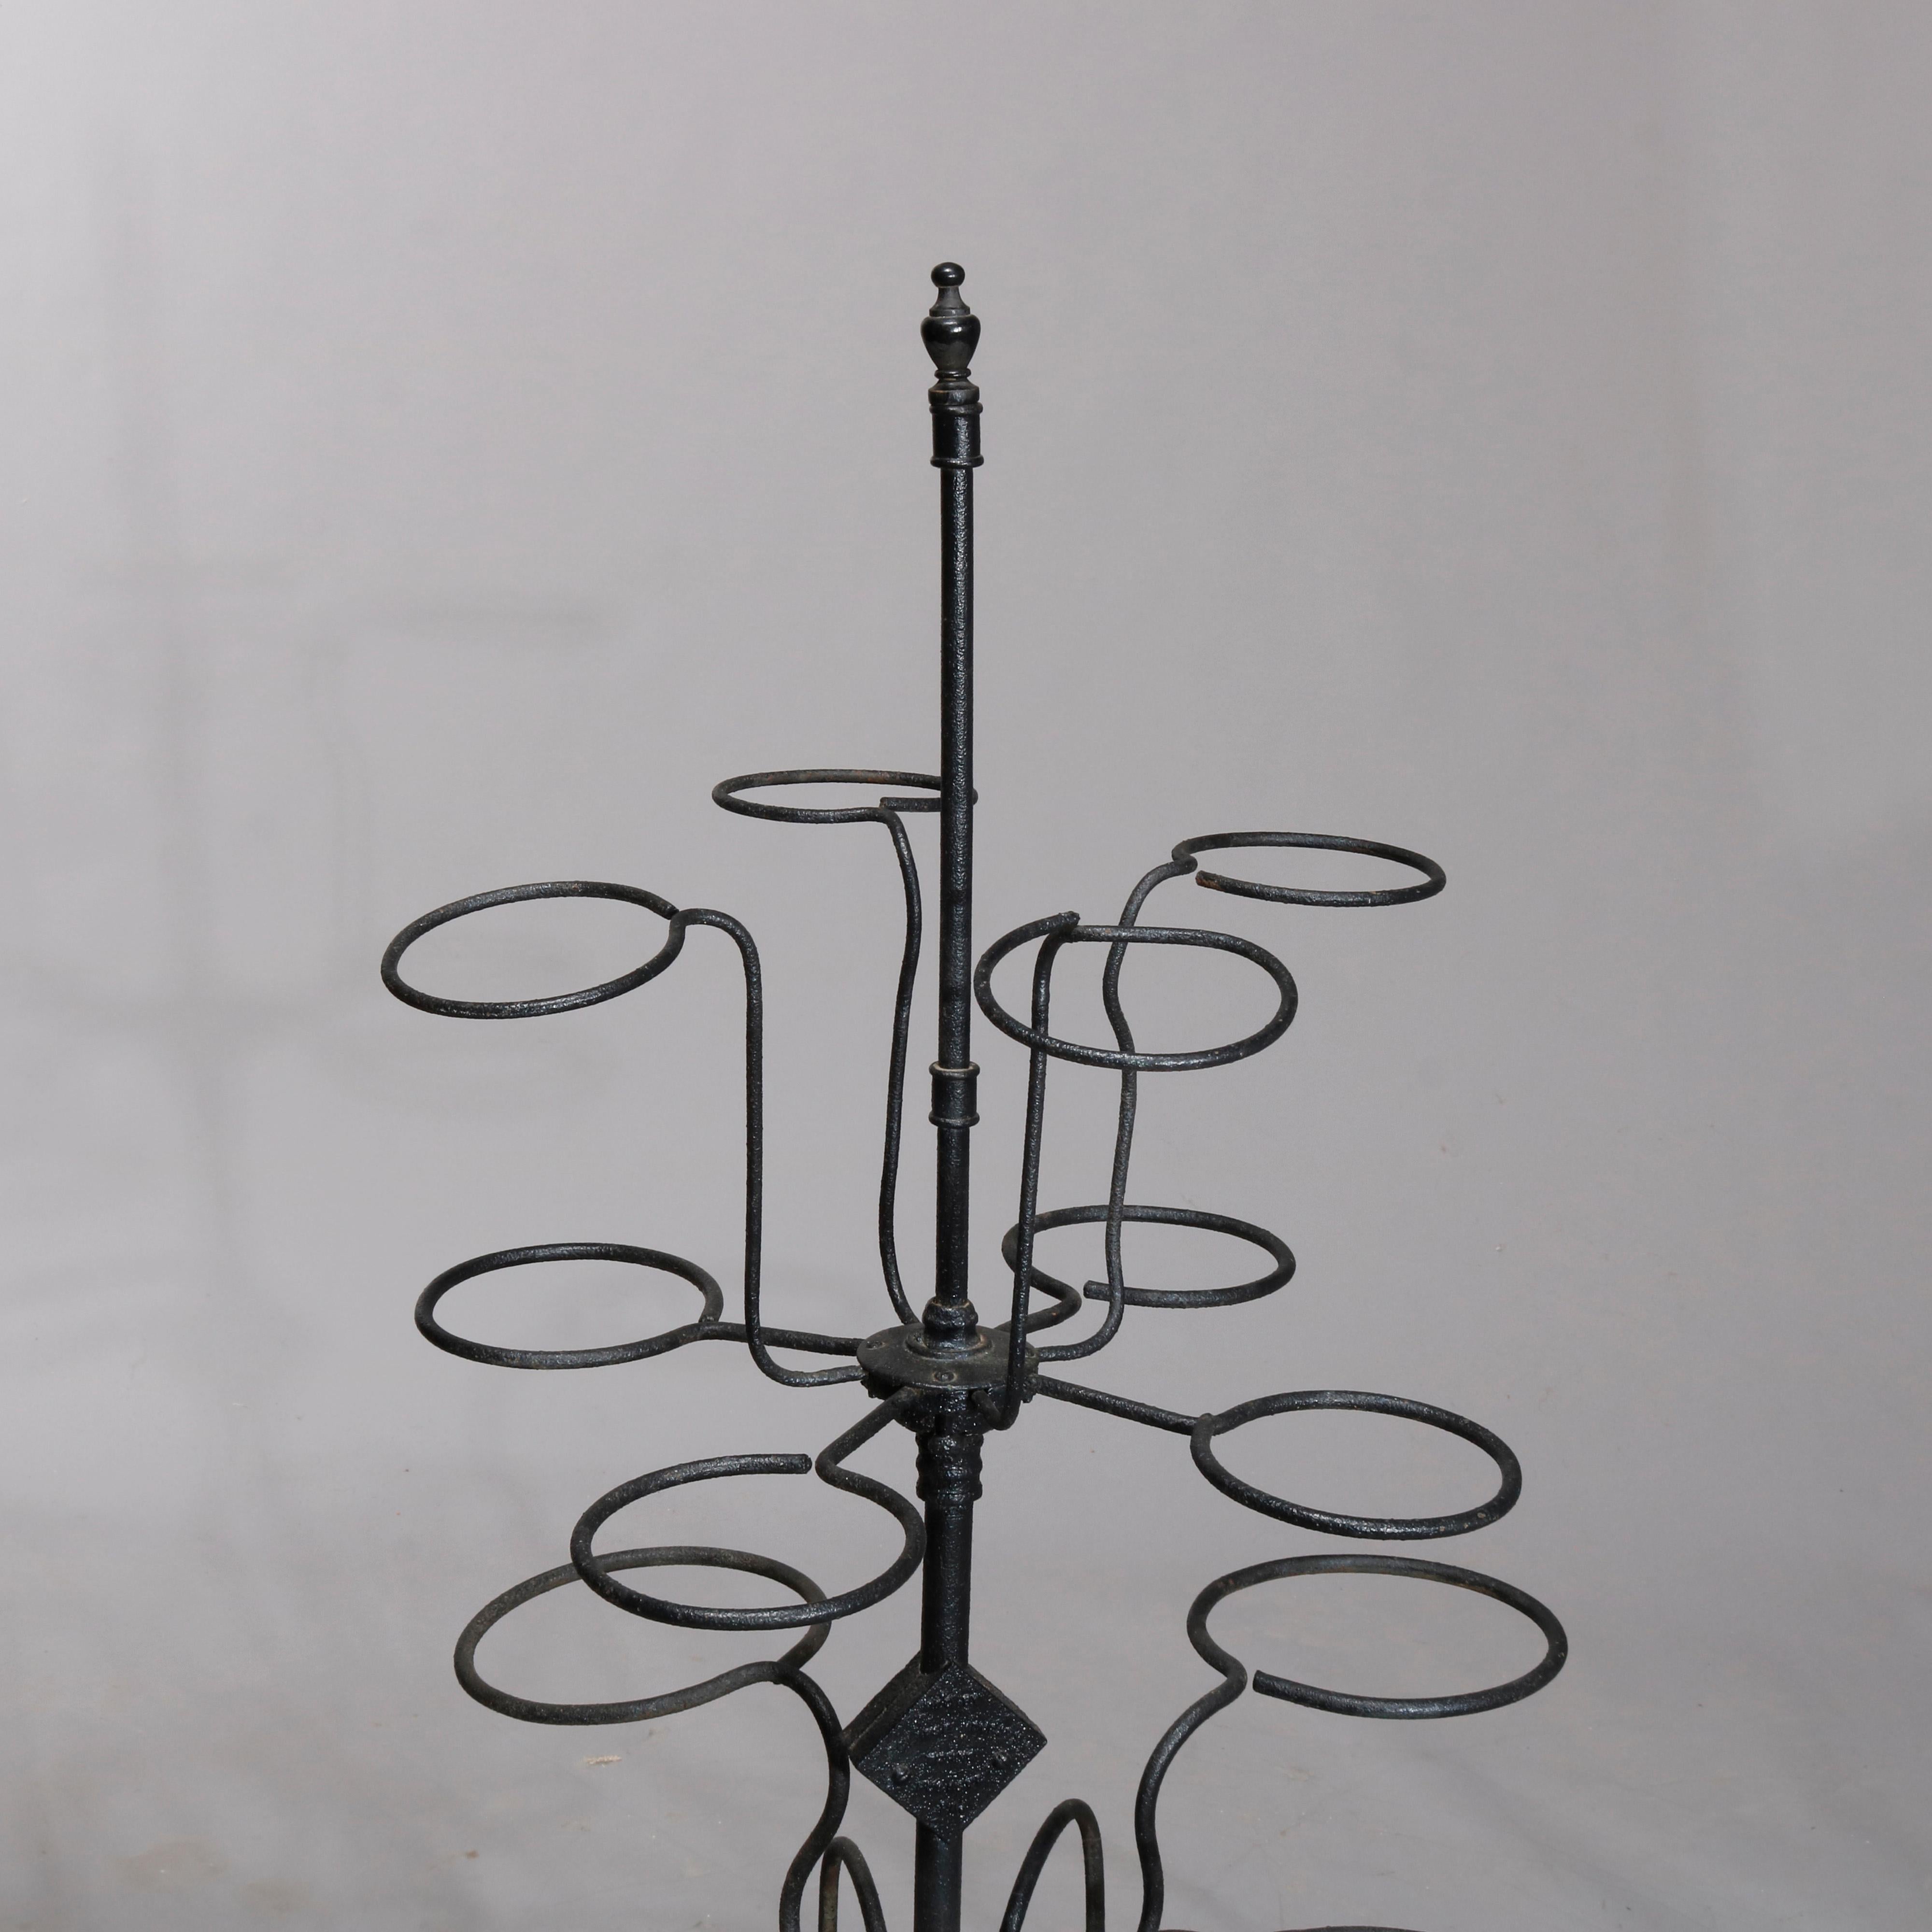 An antique garden plant display stand offers wrought iron construction with tiered scrolled arms terminating in pot receivers, raised on four legs, circa 1890

Measures: 53.25